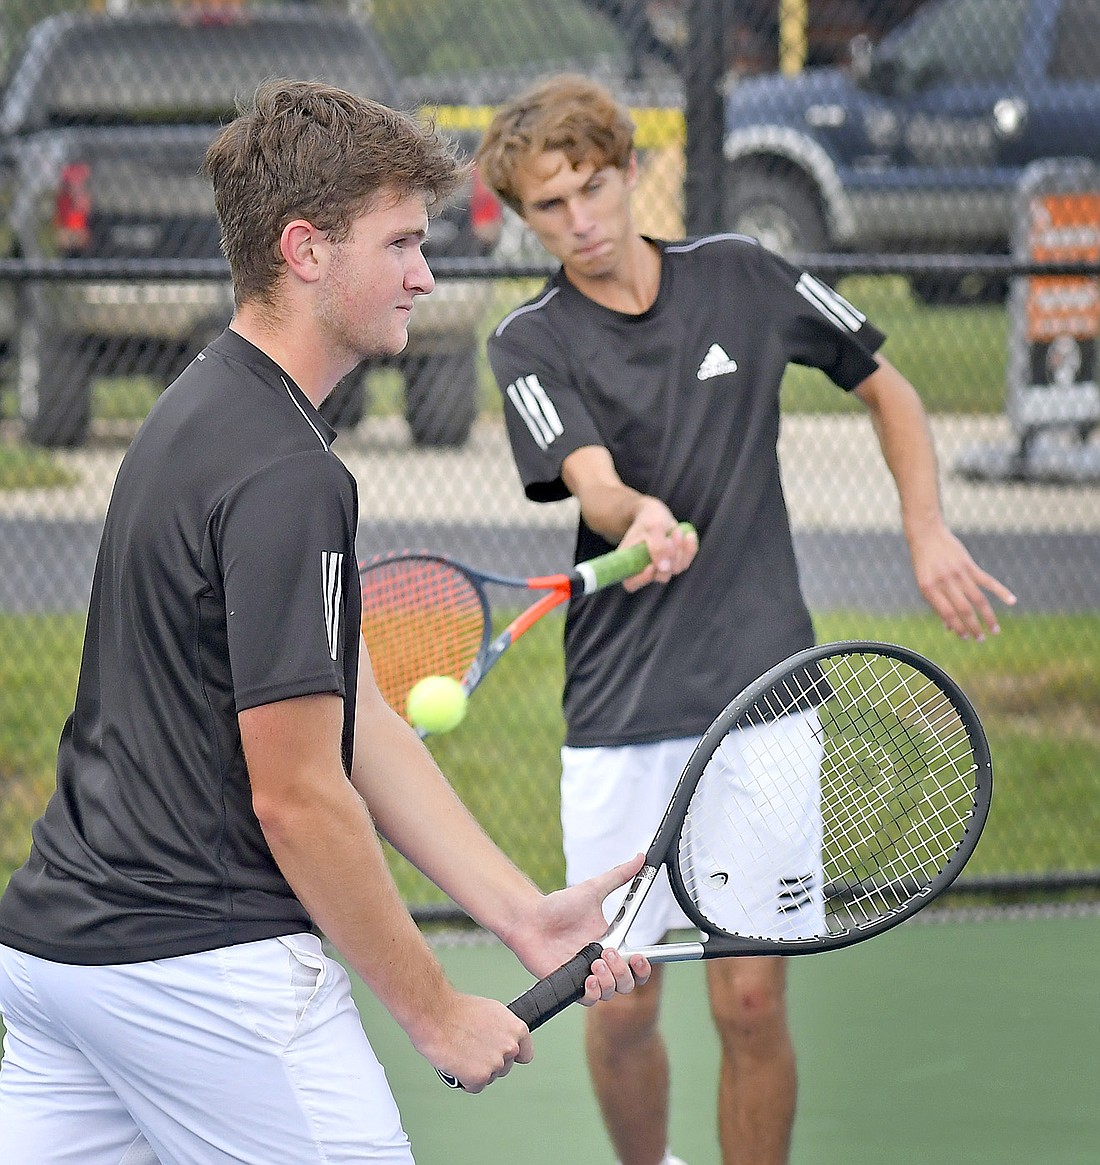 Warsaw senior Patrick Stump (R) returns a volley as classmate and teammate Caleb Smith moves into position for the return during the No. 2 doubles match against Wawasee. Photo by Gary Nieter